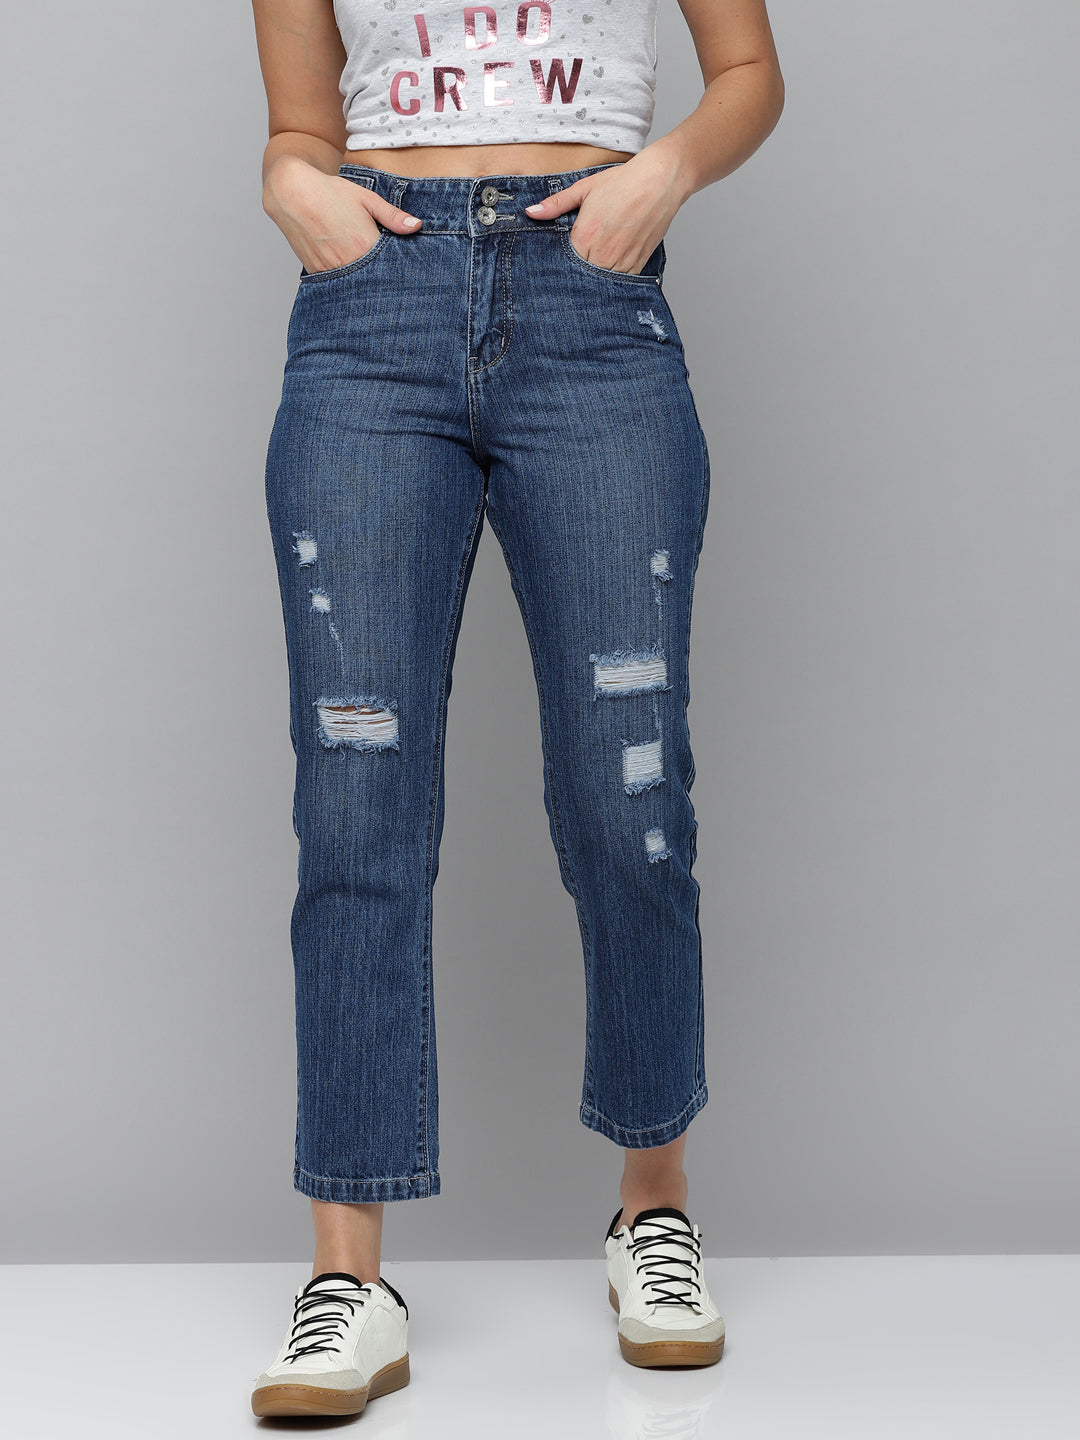 Women's Navy Blue Solid Relaxed Fit Denim Jeans